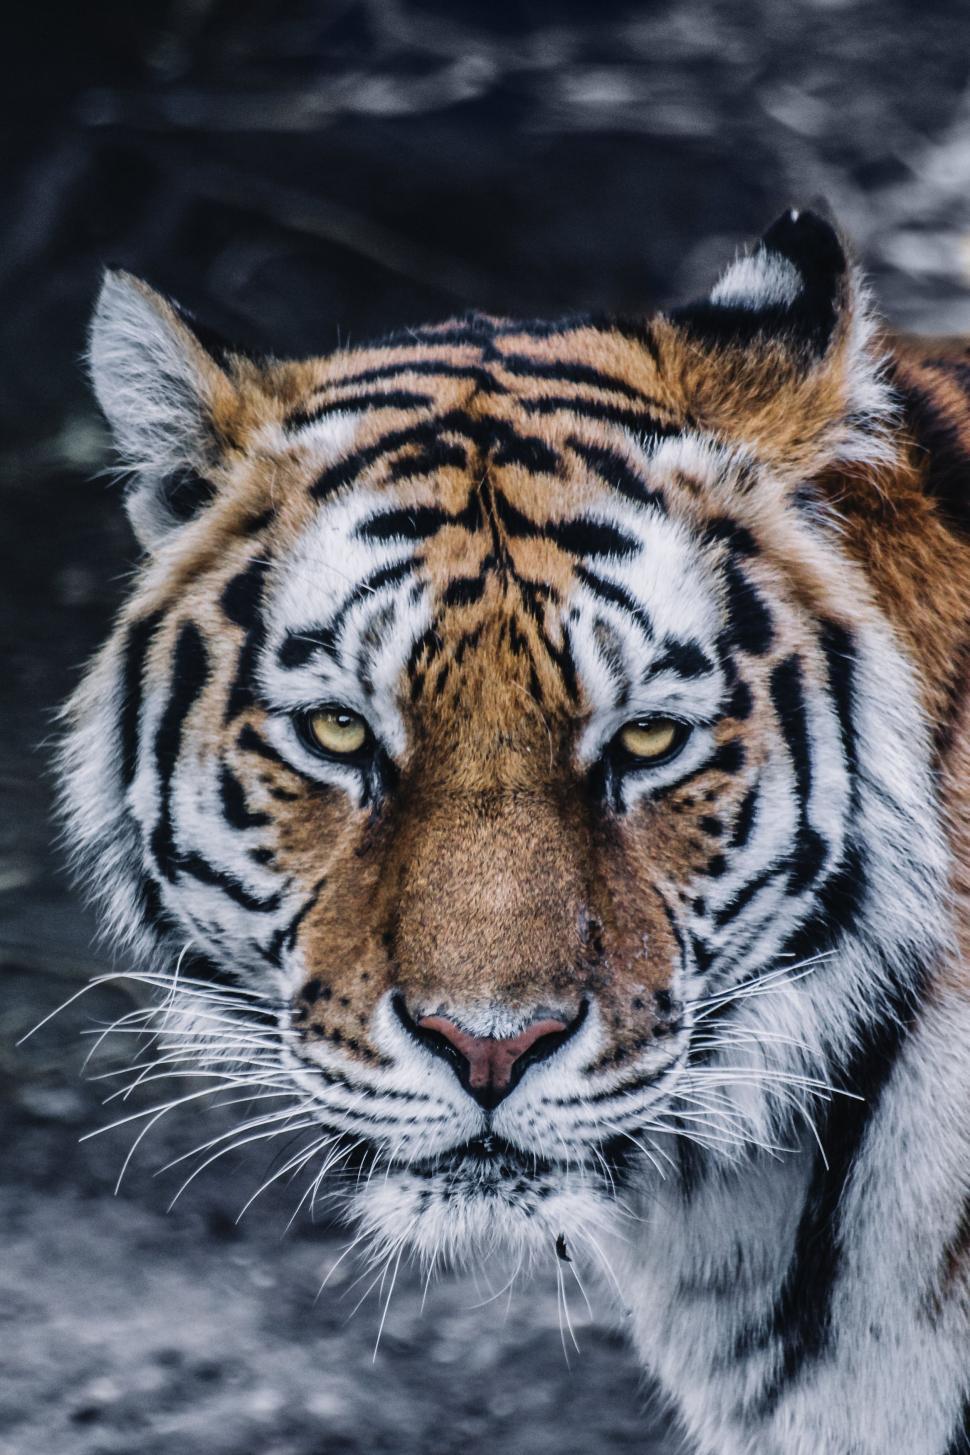 Eyes on the Tiger